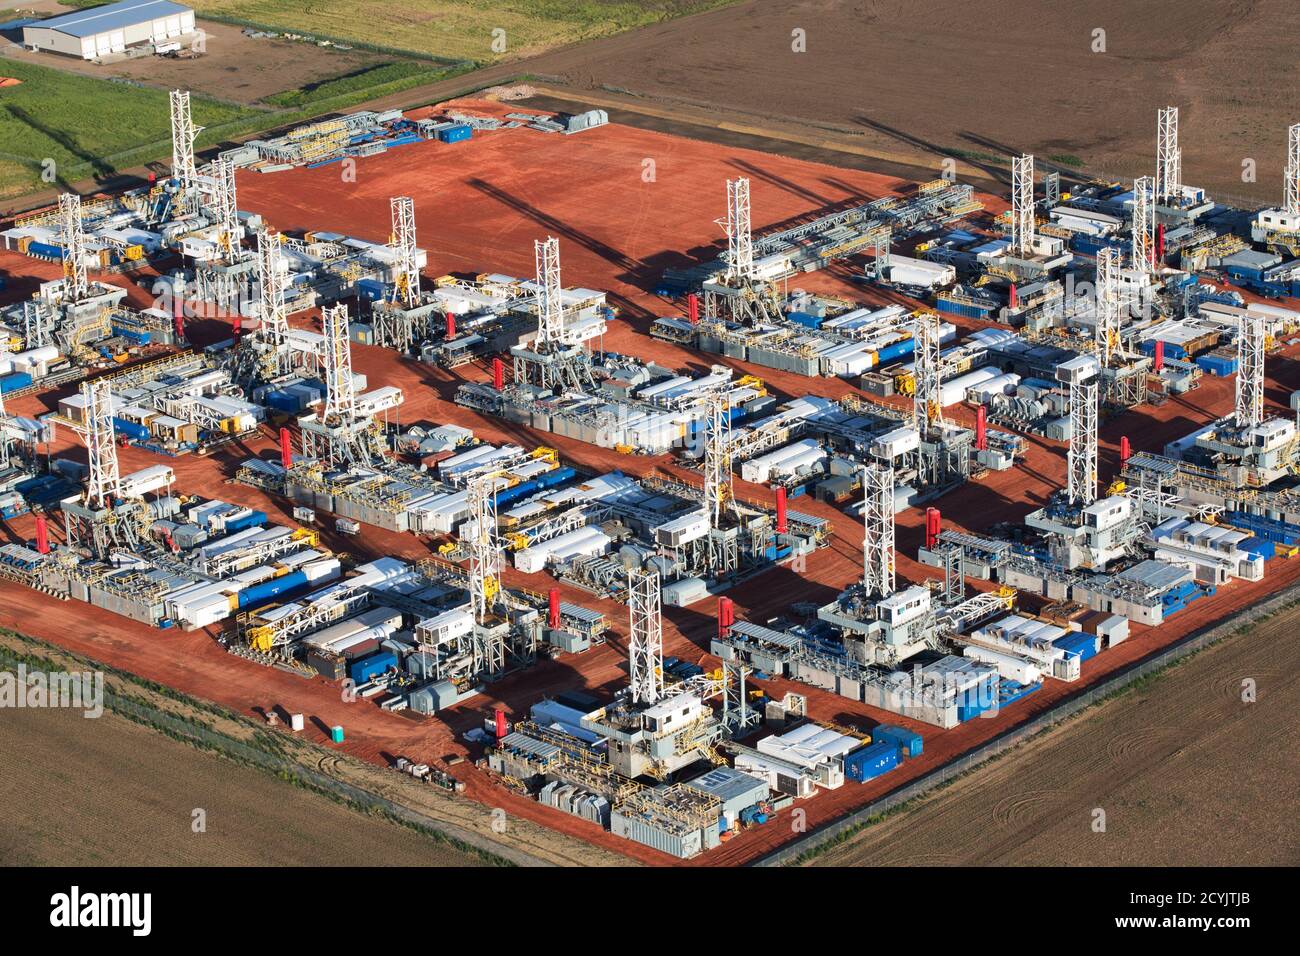 Stacked rigs are seen along with other idled oil drilling equipment at a depot in Dickinson, North Dakota June 26, 2015. Since November, the Saudi Arabian-led OPEC cartel has held to a policy of unconstrained output, an approach many suspect is designed to flood global markets with more crude, push prices lower and punish rivals, including North Dakota, the second-largest U.S. oil producer.  REUTERS/Andrew Cullen Stock Photo